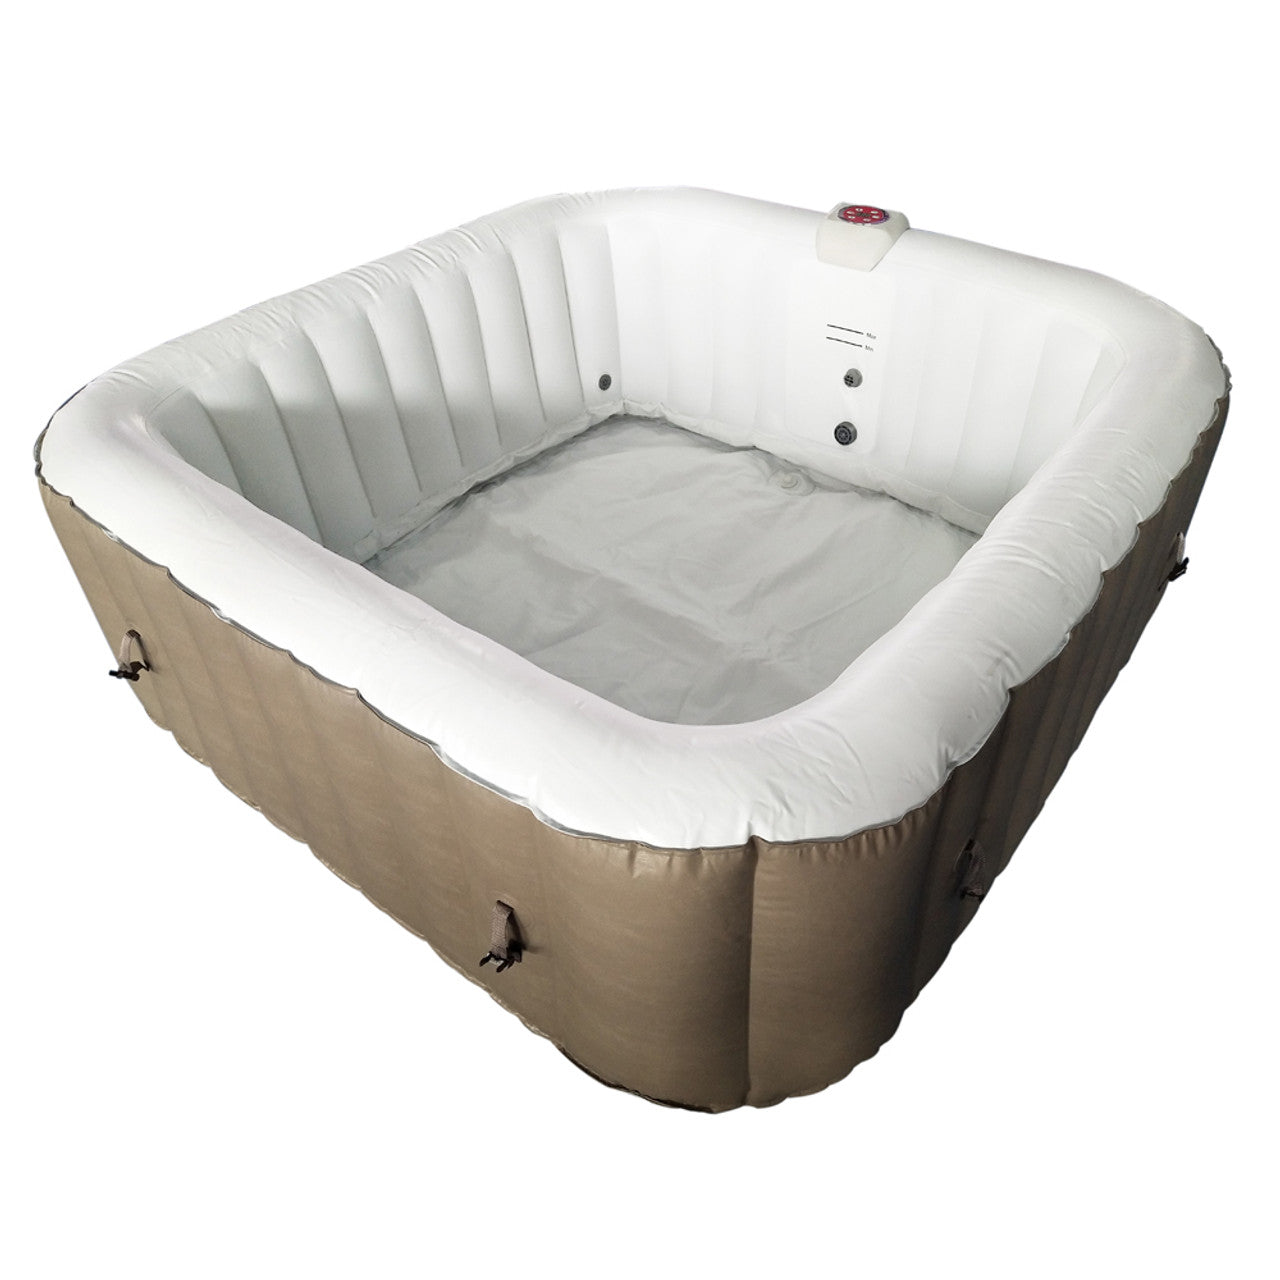 Aleko Square Inflatable Jetted Hot Tub with Cover - 6 Person - 250 Gallon - Brown and White HTISQ6BRWH-AP - Serenity Provision